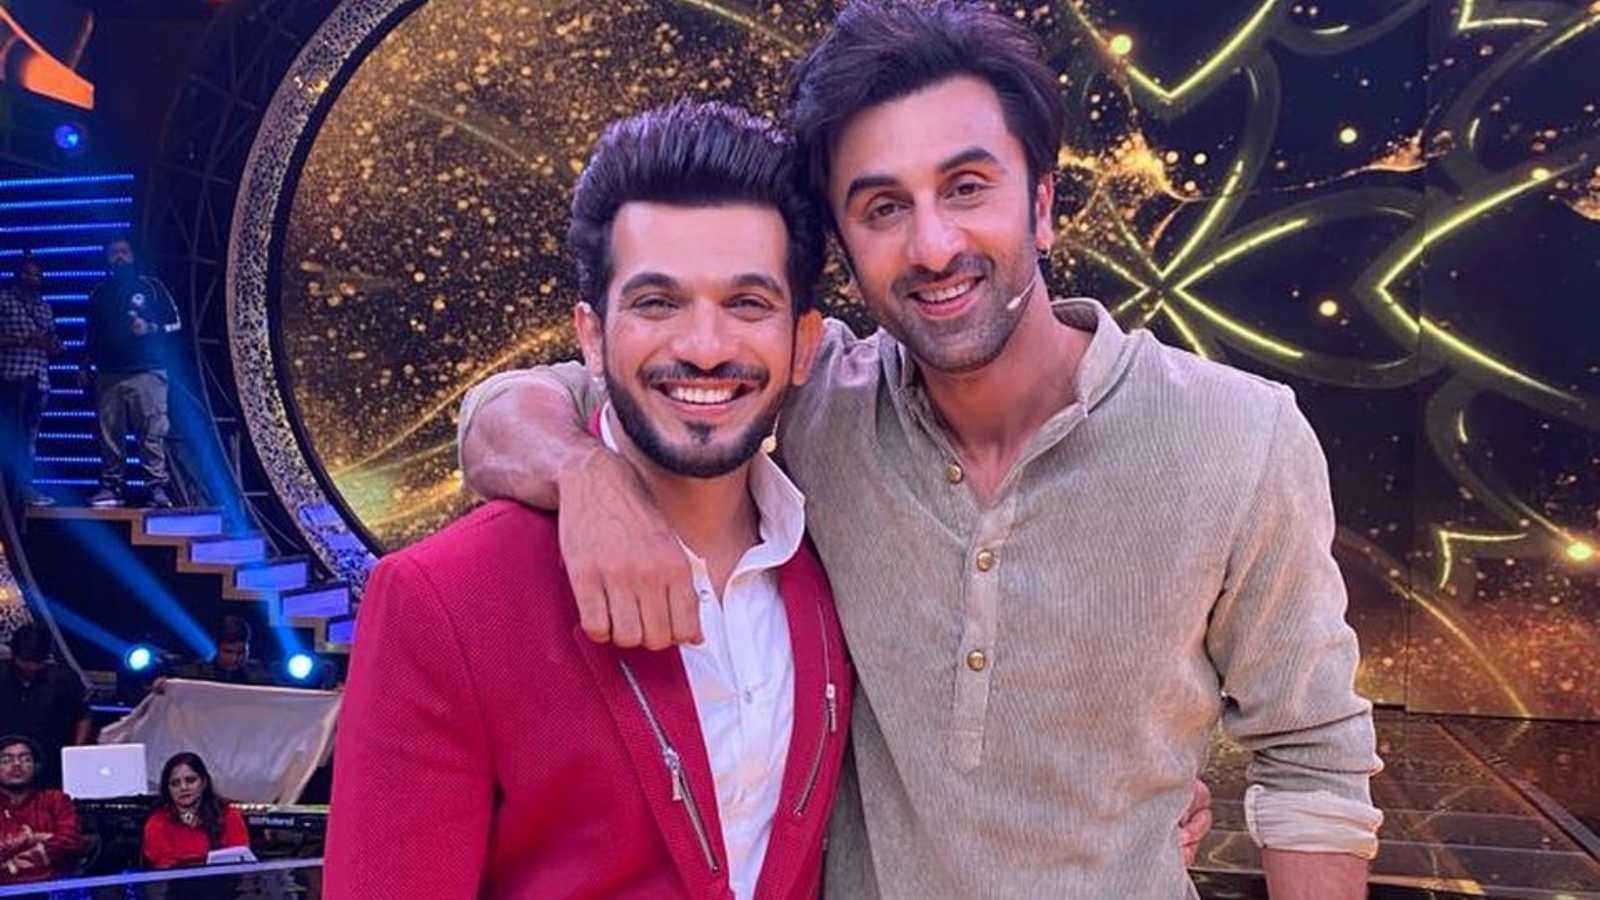 Arjun Bijlani had no desire to 'show off' childhood connection with Ranbir Kapoor when they reunited on a TV show: 'Don’t need to show that'